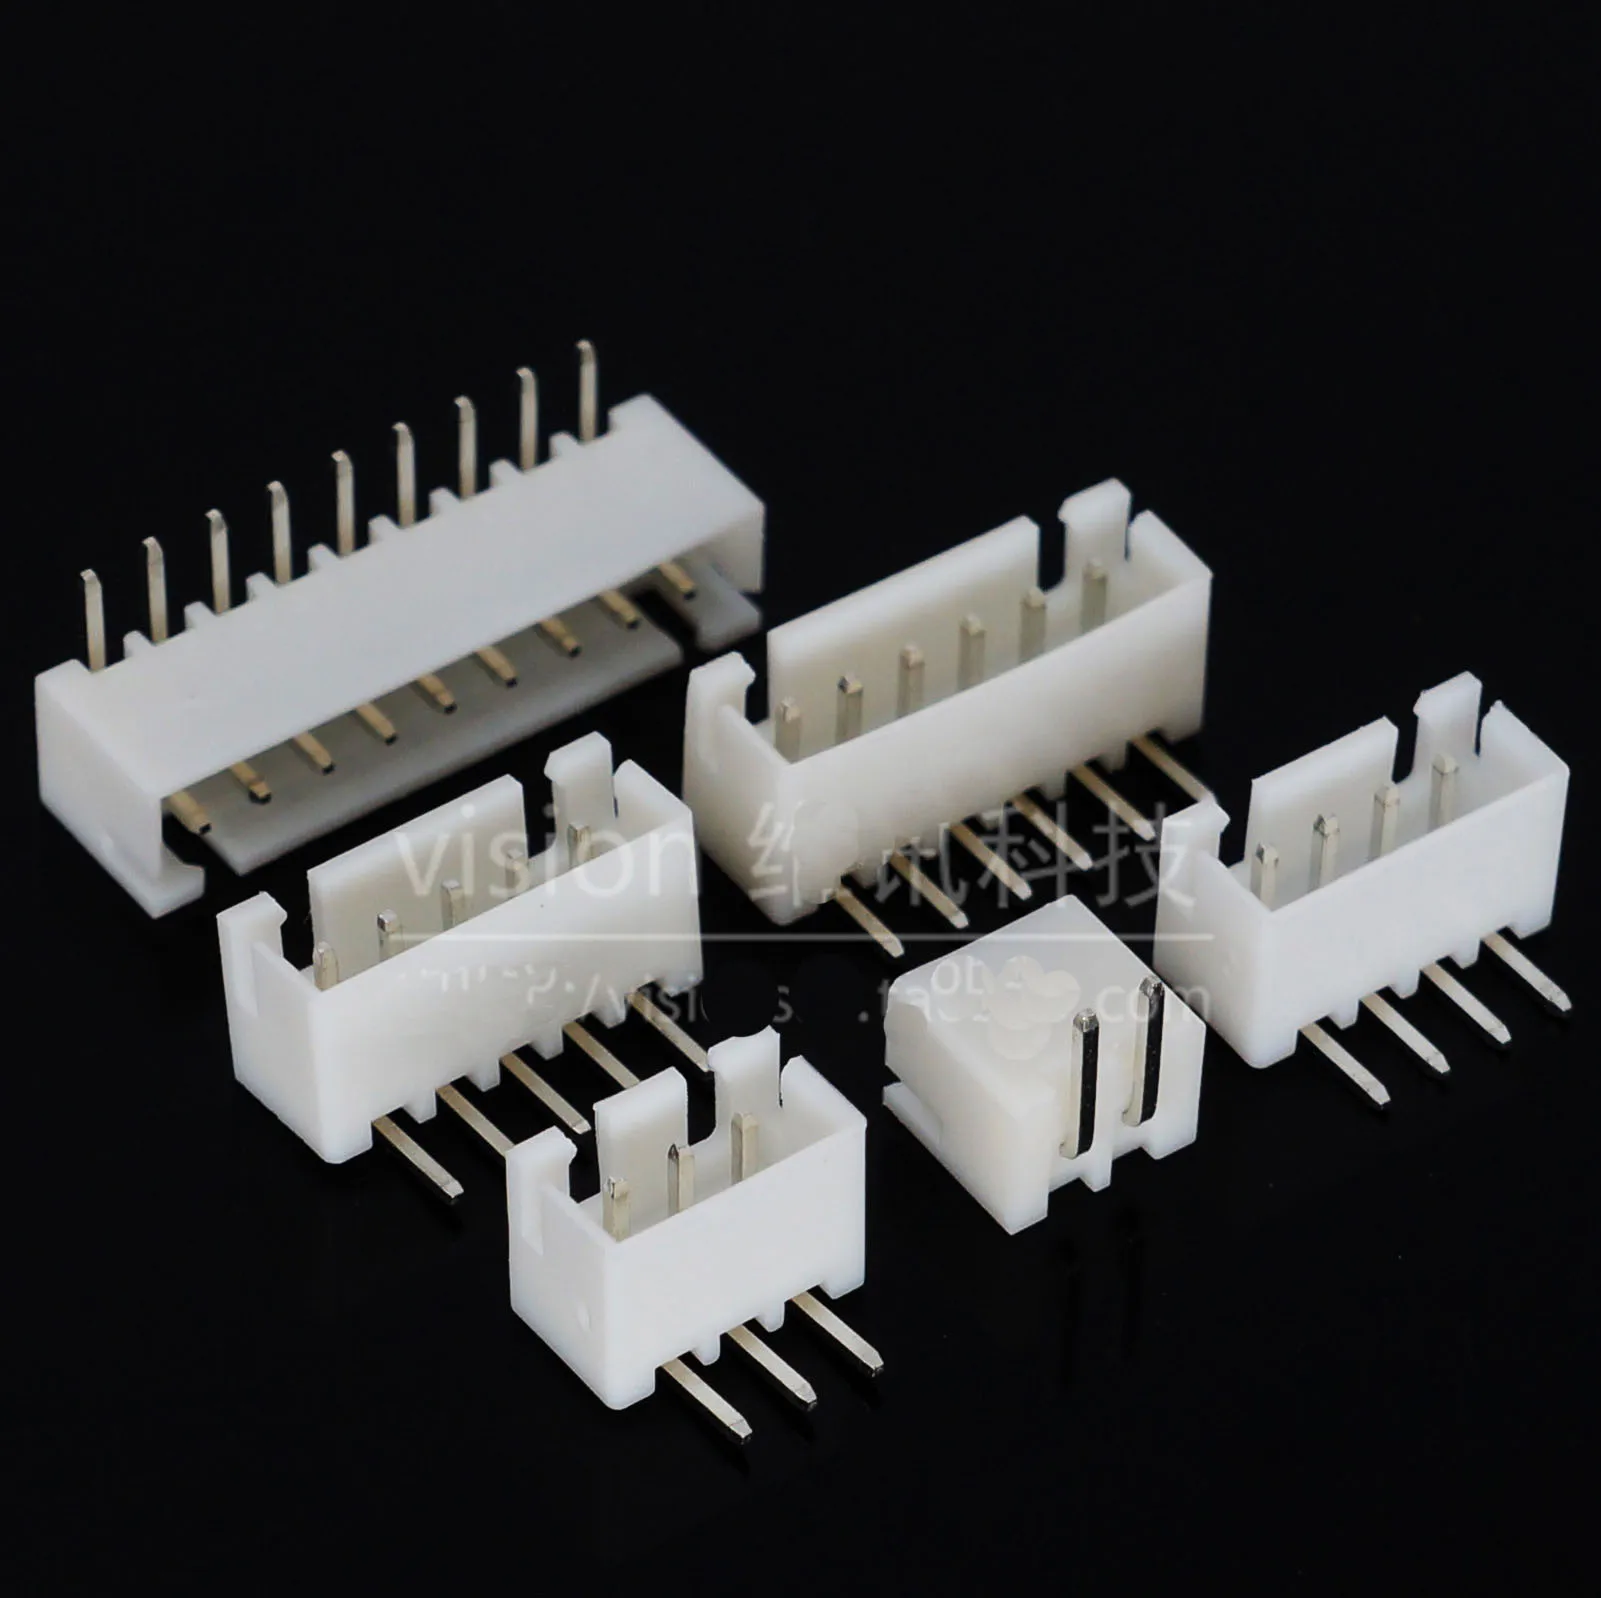 

10pcs XH2.54 2P/3P/4P/5P/6P/7P/8P/9P/10P/11P/12P/13P/14P 2.54mm Pitch Terminal /Pin Header JST 90 degrees Connector Wire Adaptor